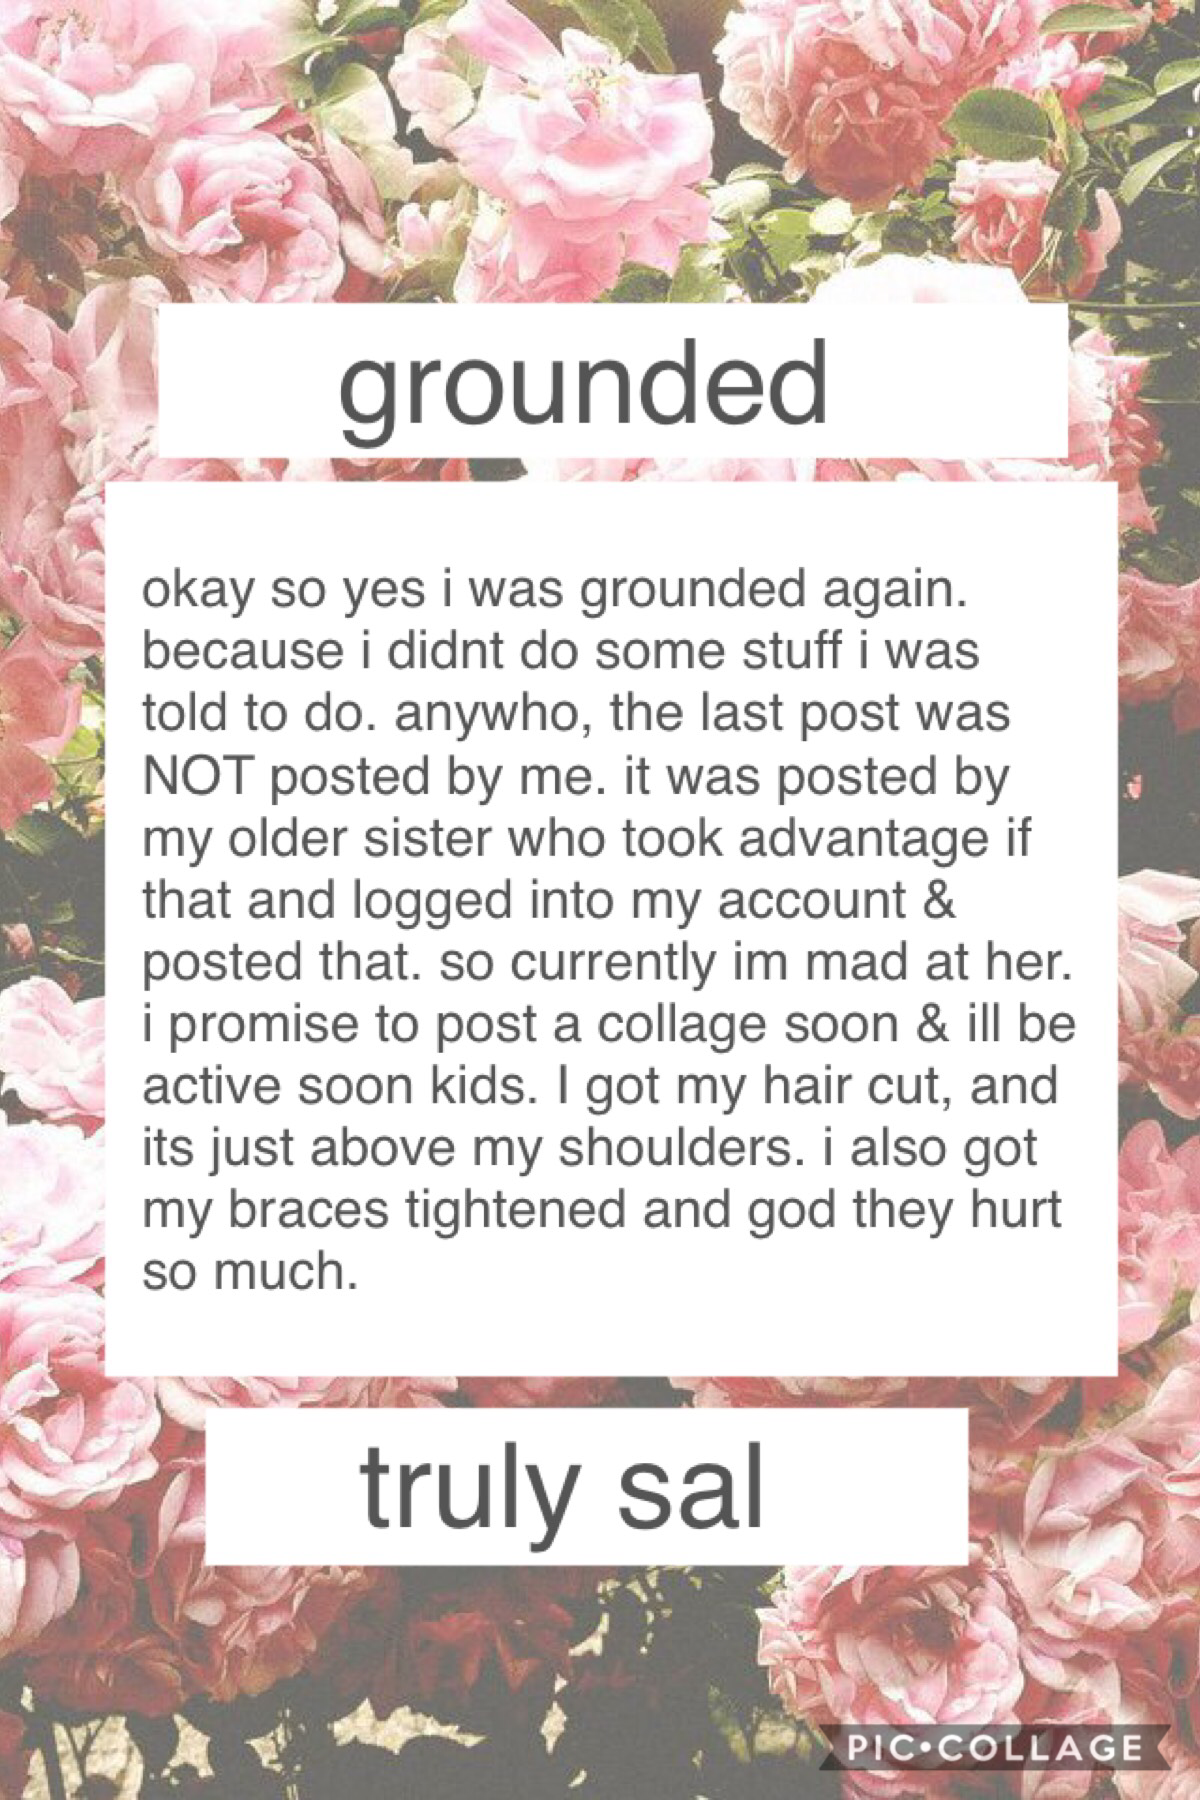 🌹So yes I was grounded🌹THE LAST POST WAS POSTED BY MY OLDER SISTER🌹My hair is now short and it feels amazing & so soft🌹 So what did I miss kids?🌹
#PCONLY
#GROUNDED 
#AGAIN
#MY 
#HAIR
#IS
#SHORT
#OKAY
#BAII
🌹🌹🌹
